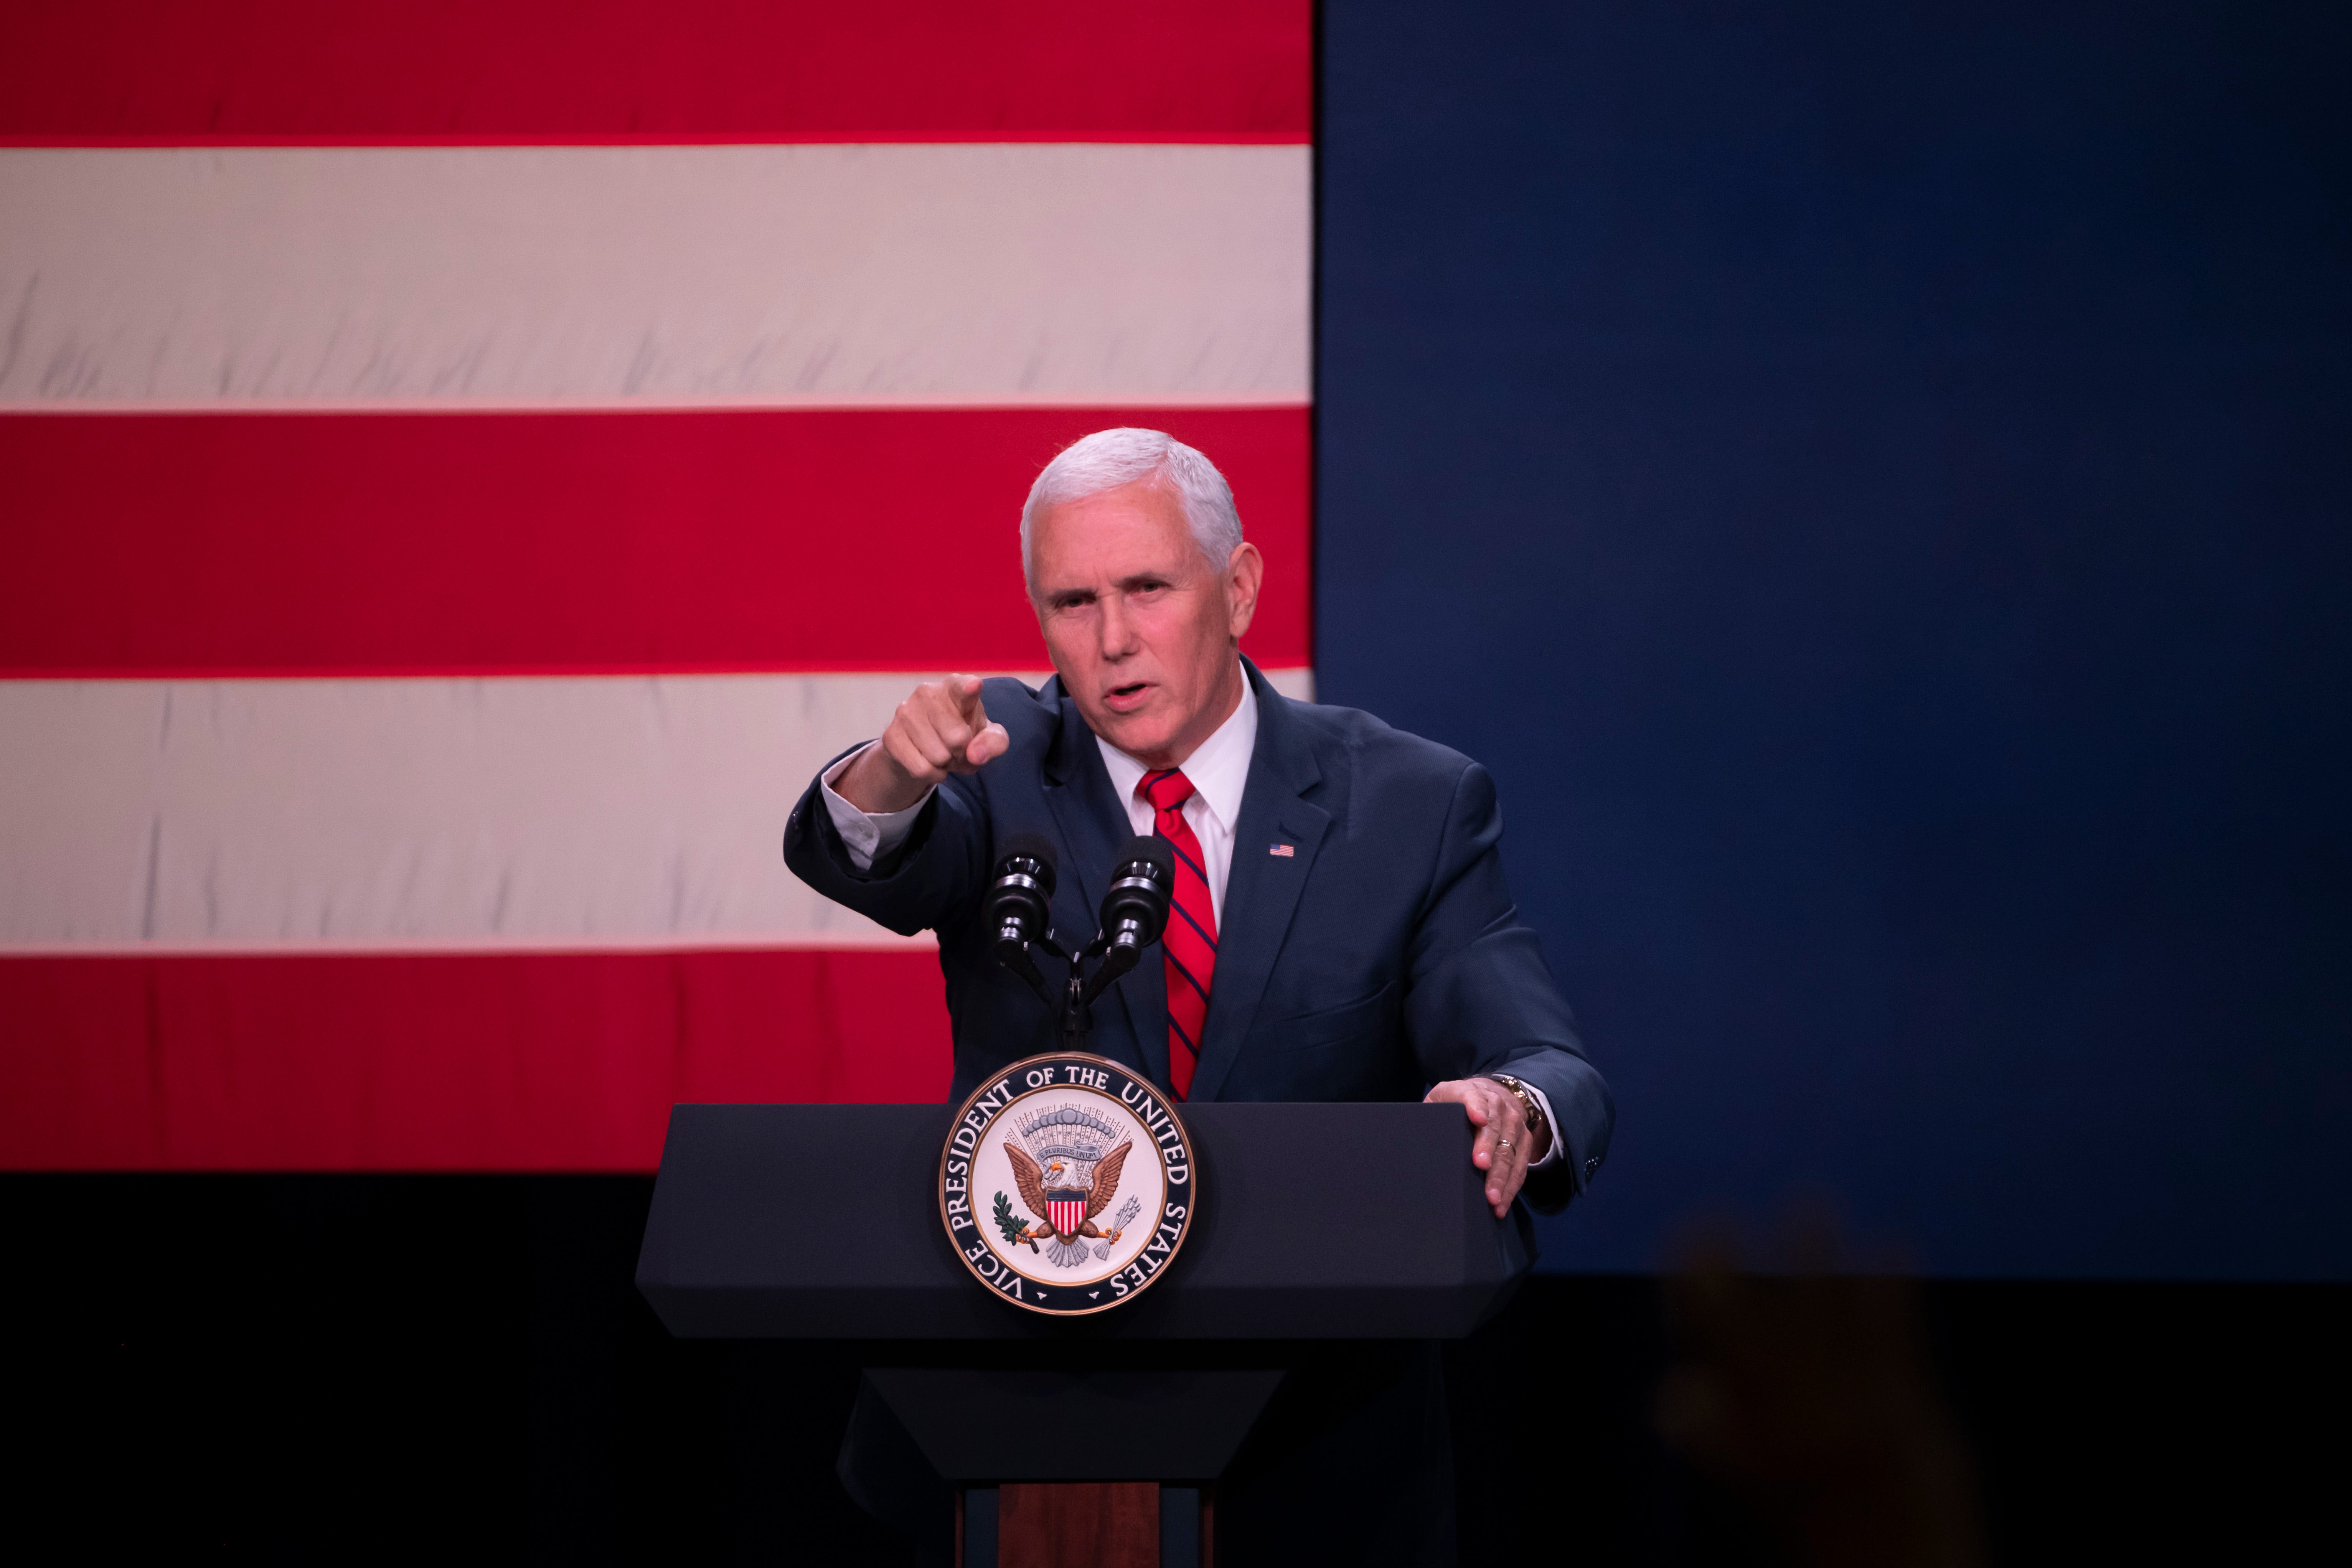 Vice President Mike Pence points during his speech.